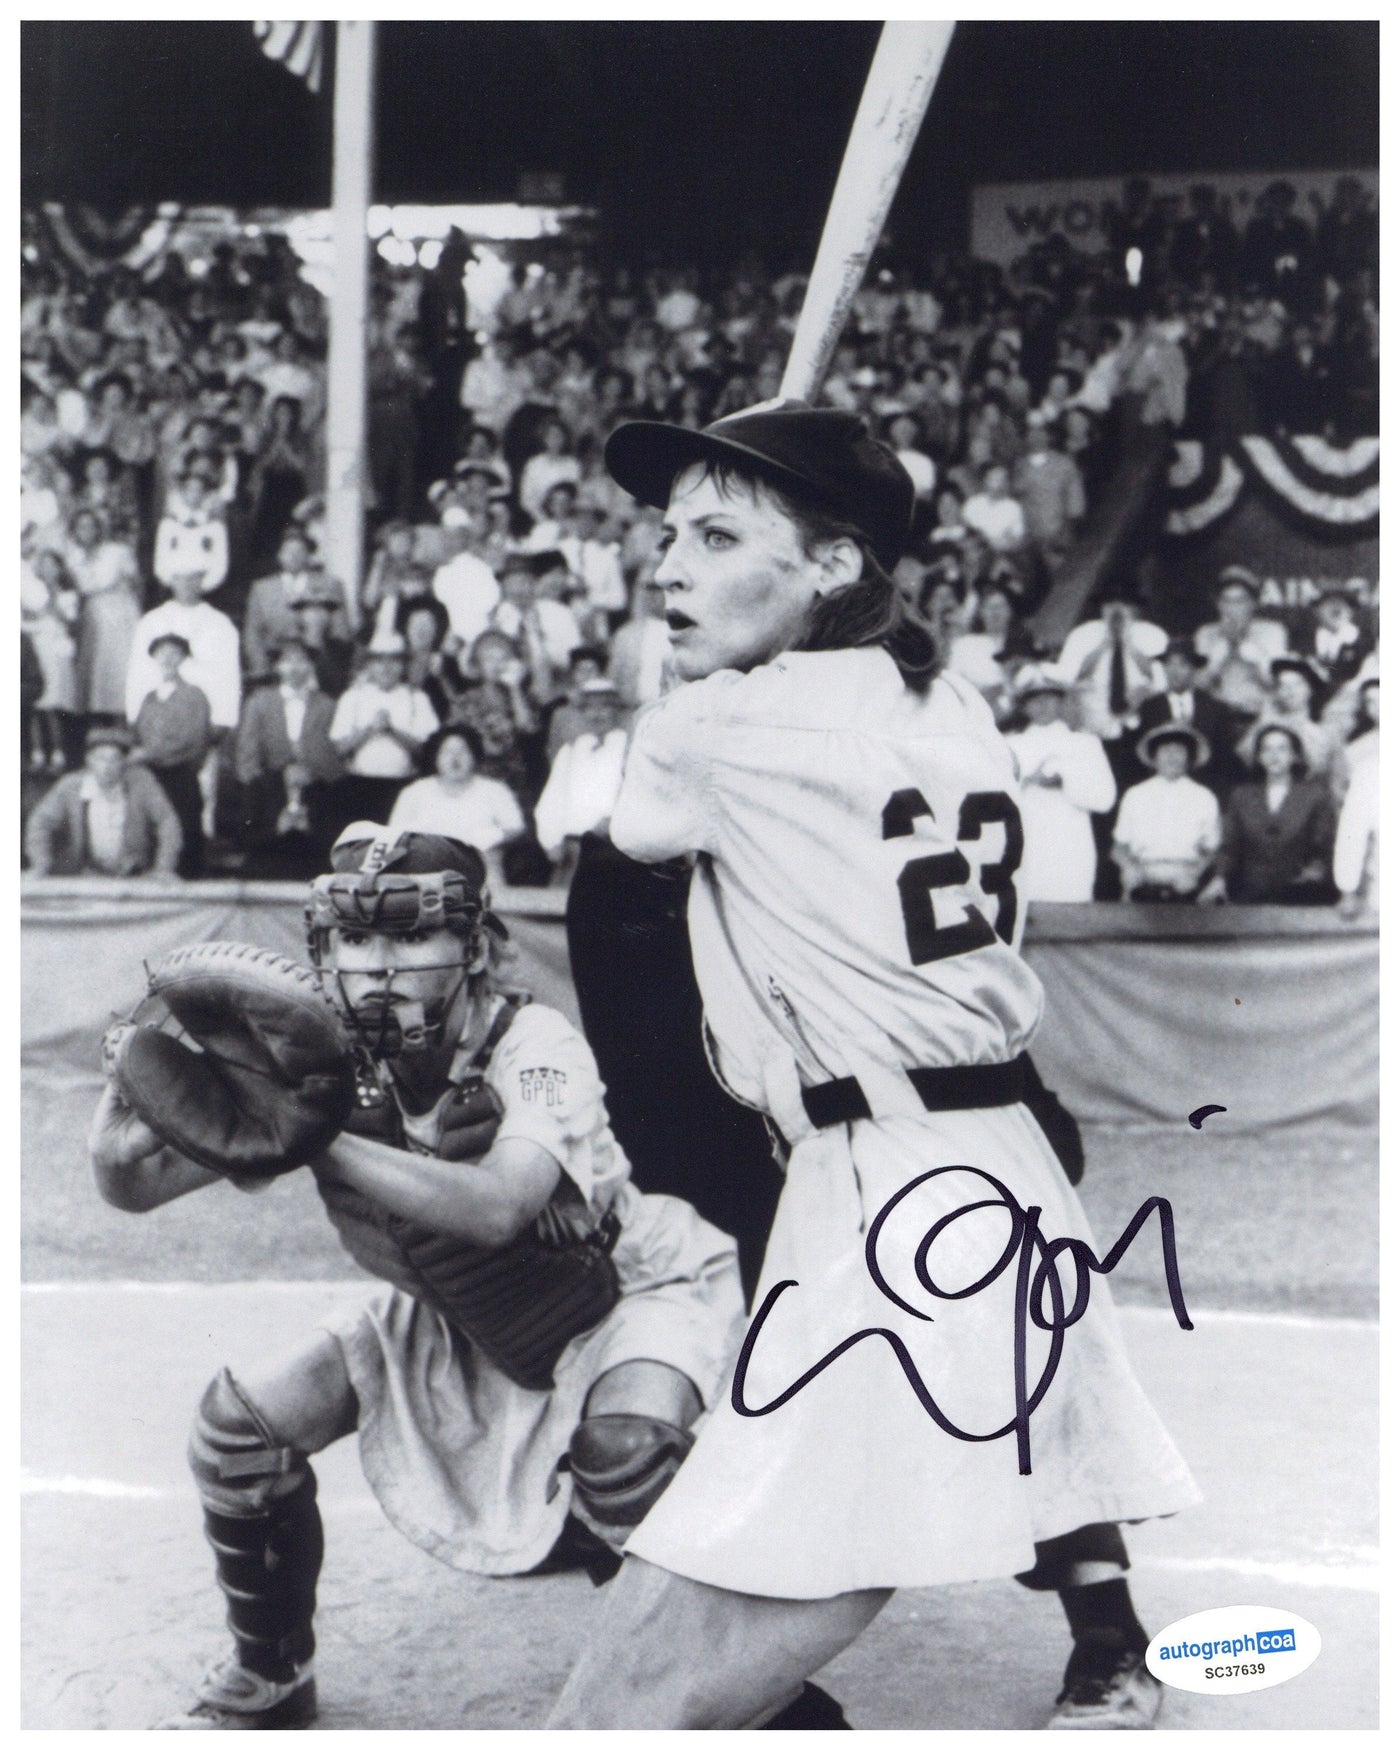 Lori Petty Signed 8x10 Photo A League of their Own Autographed AutographCOA